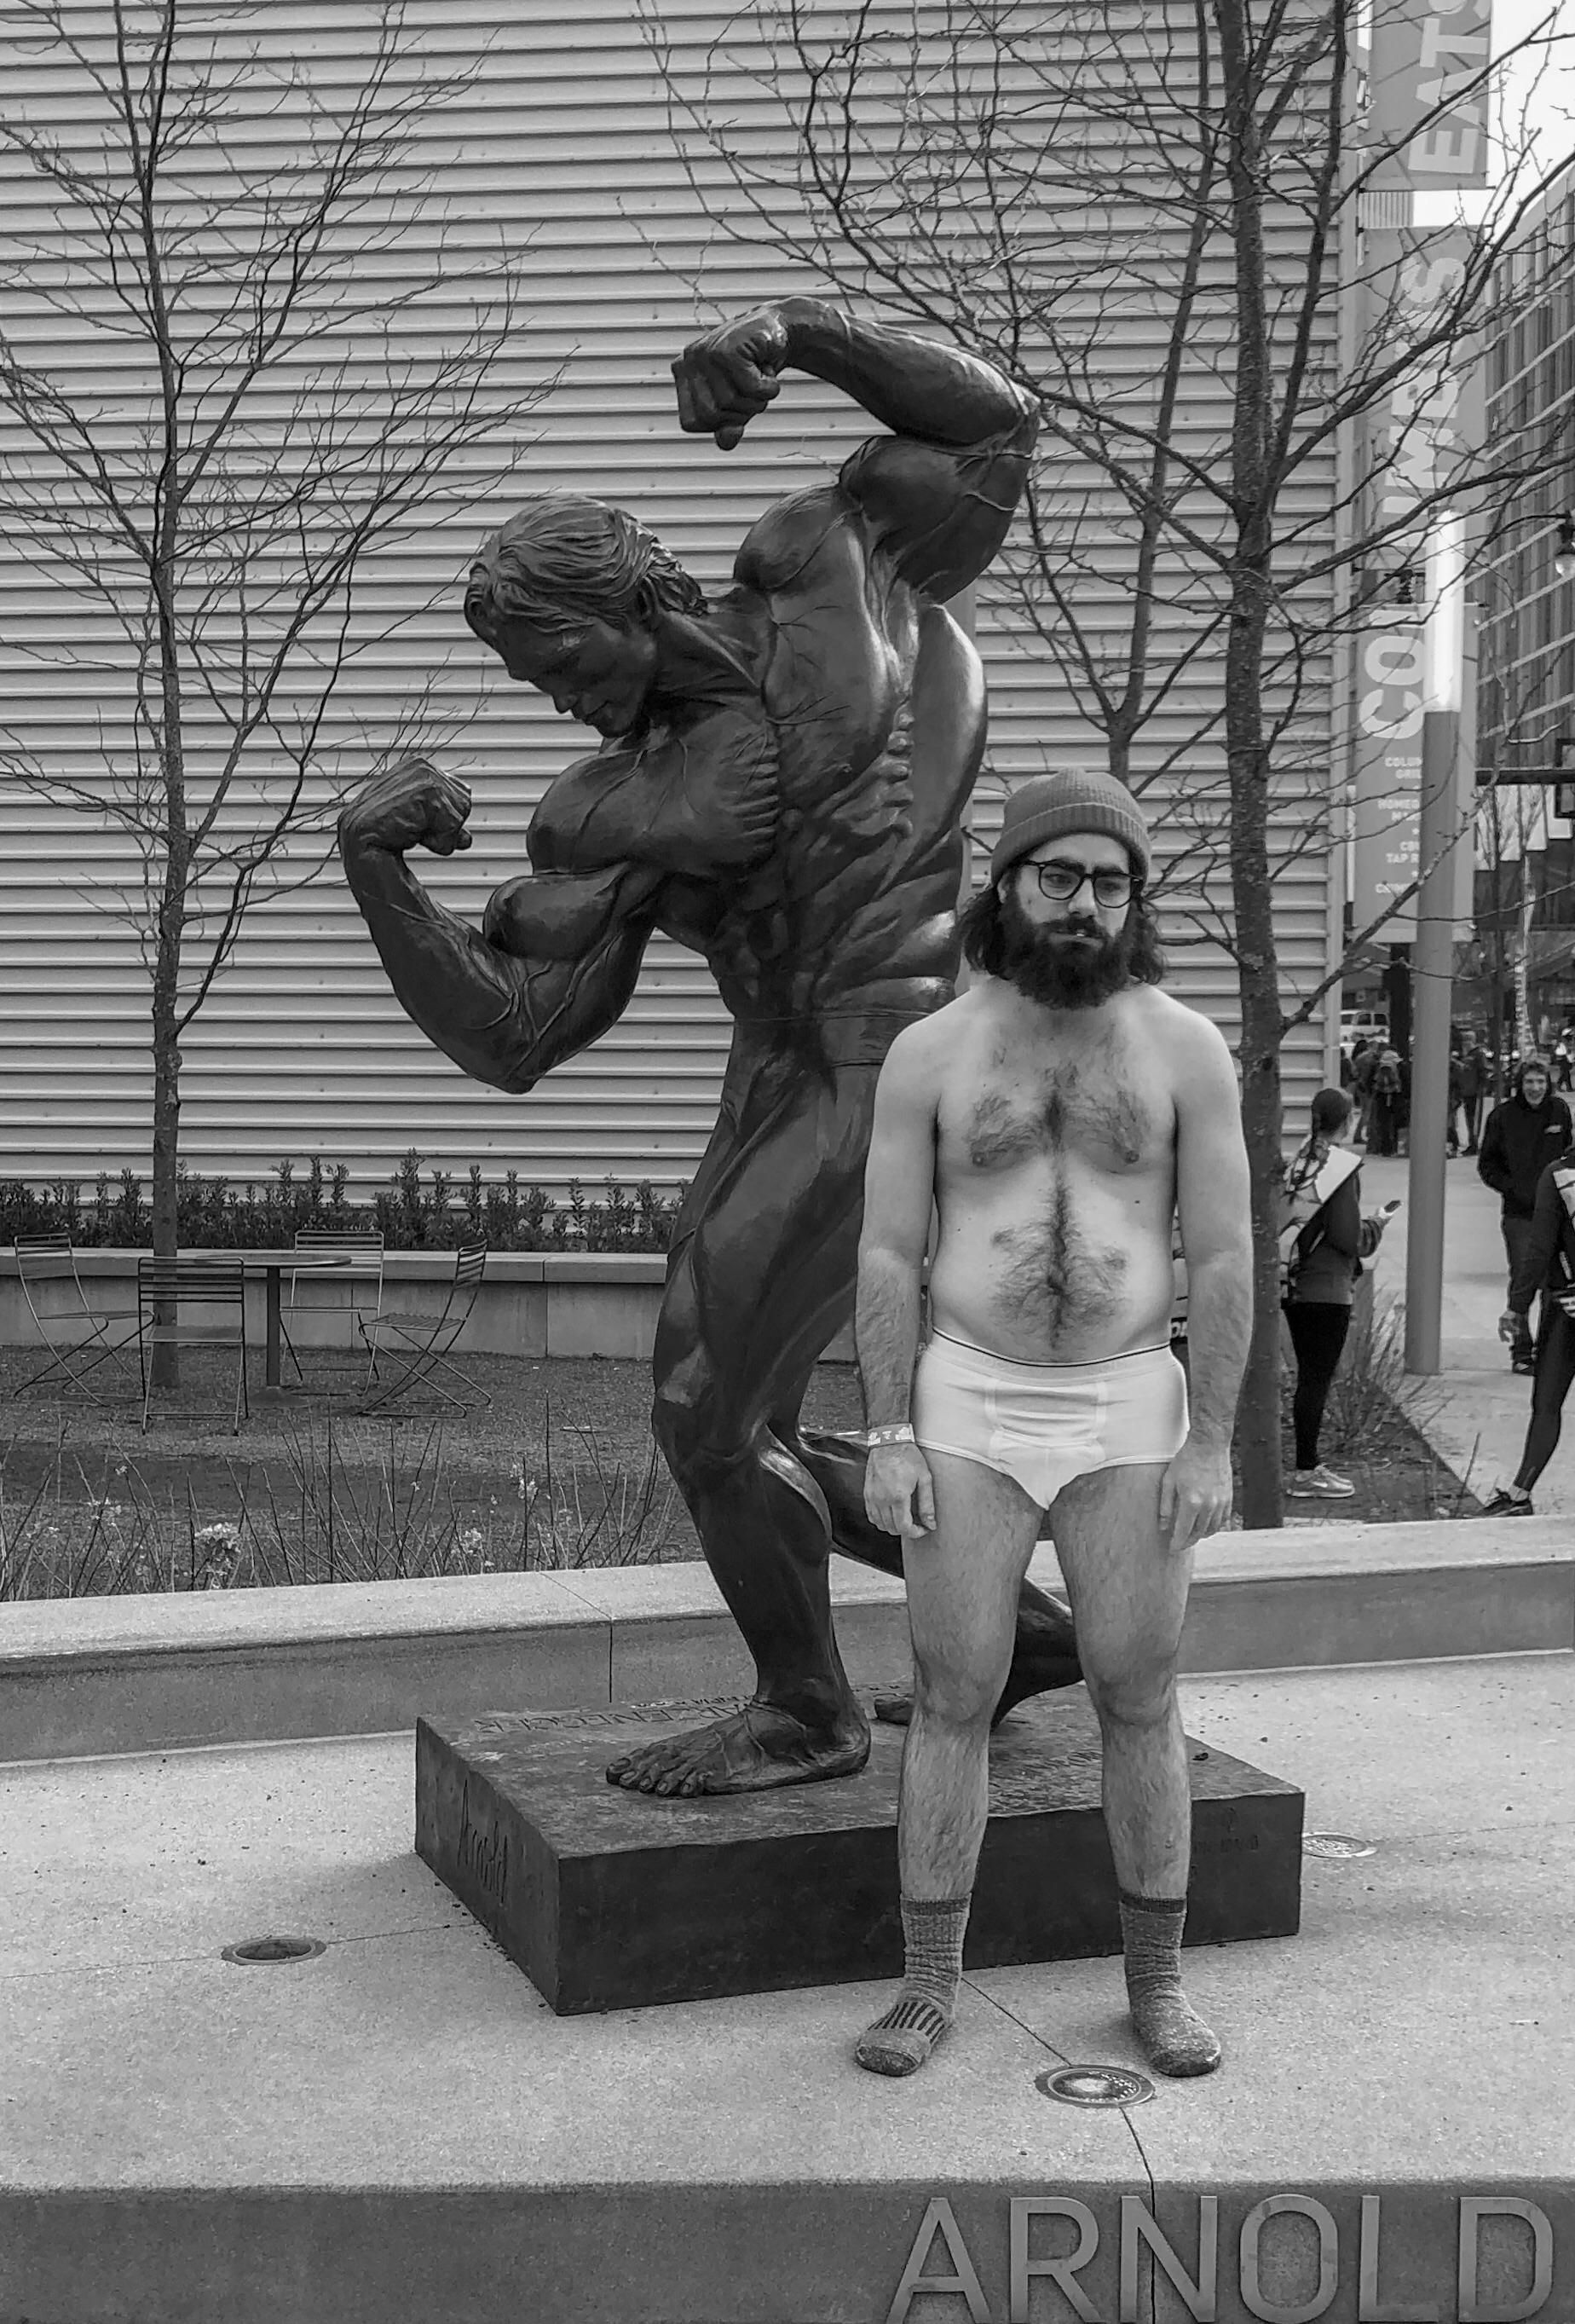 Went to Arnoldfest this weekend. Took this photo in front of the Arnold statue. Just wanted to fit in.